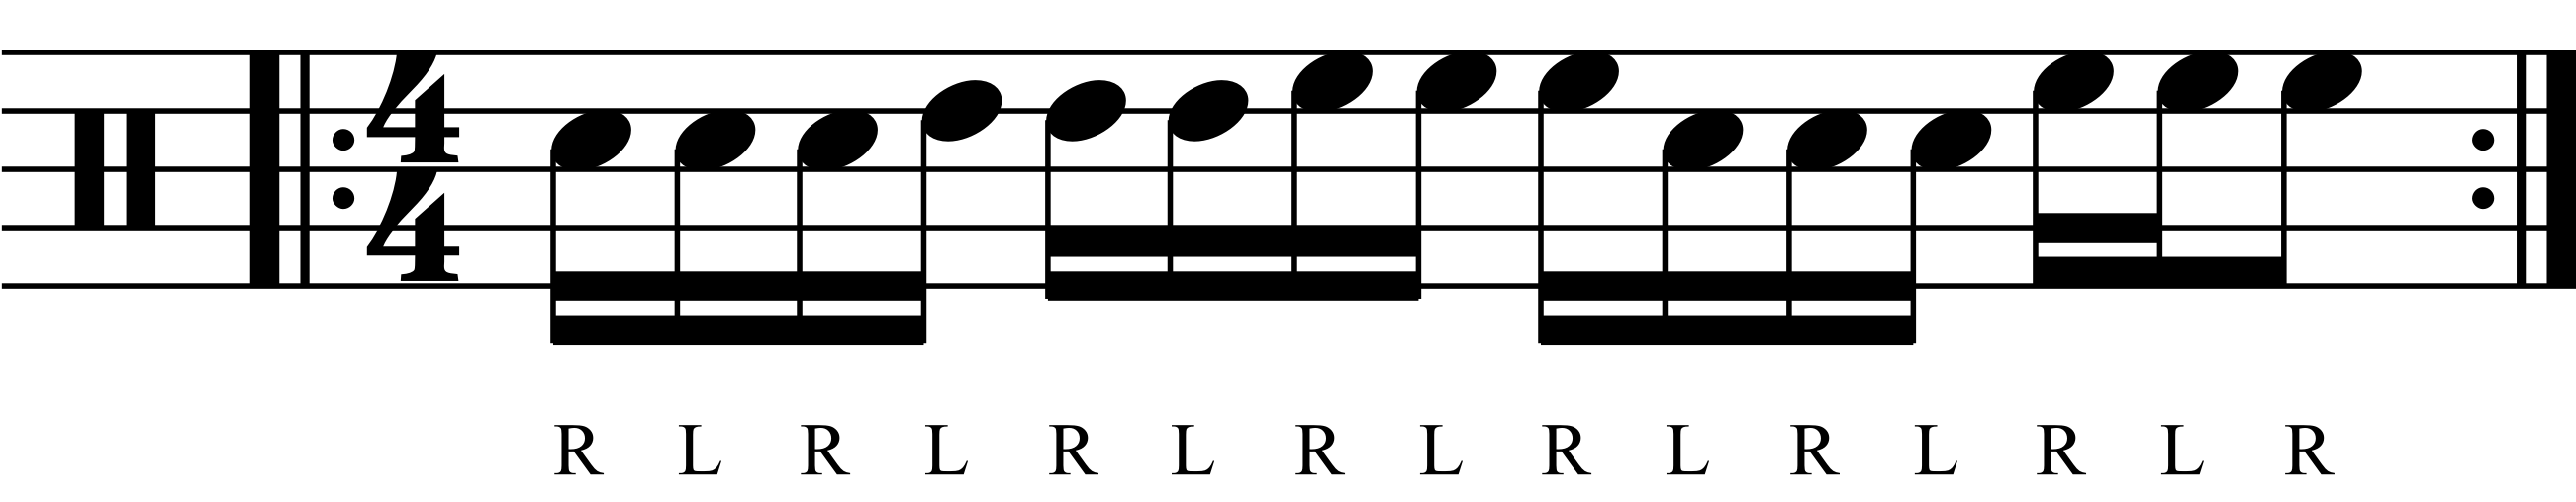 Single stroke roll played as groups of three